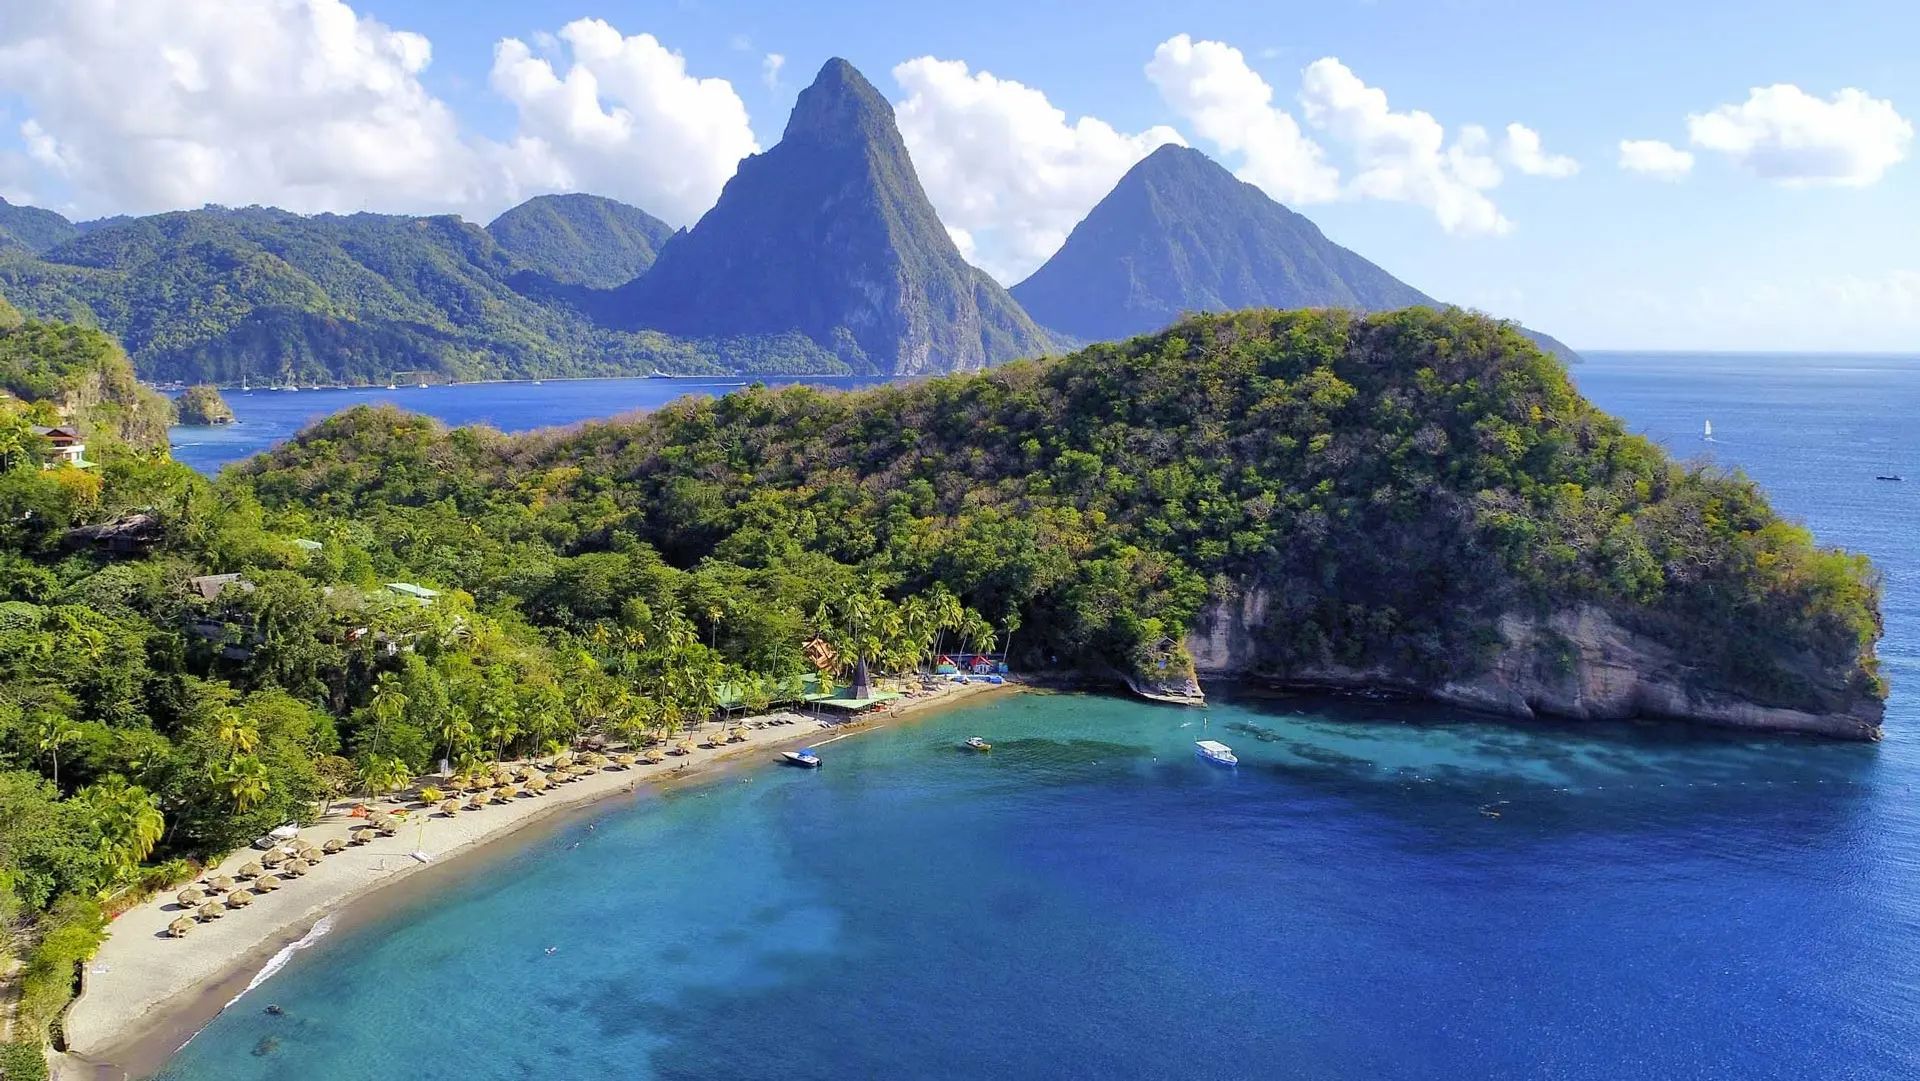 Hotel review Location' - Jade Mountain - 4